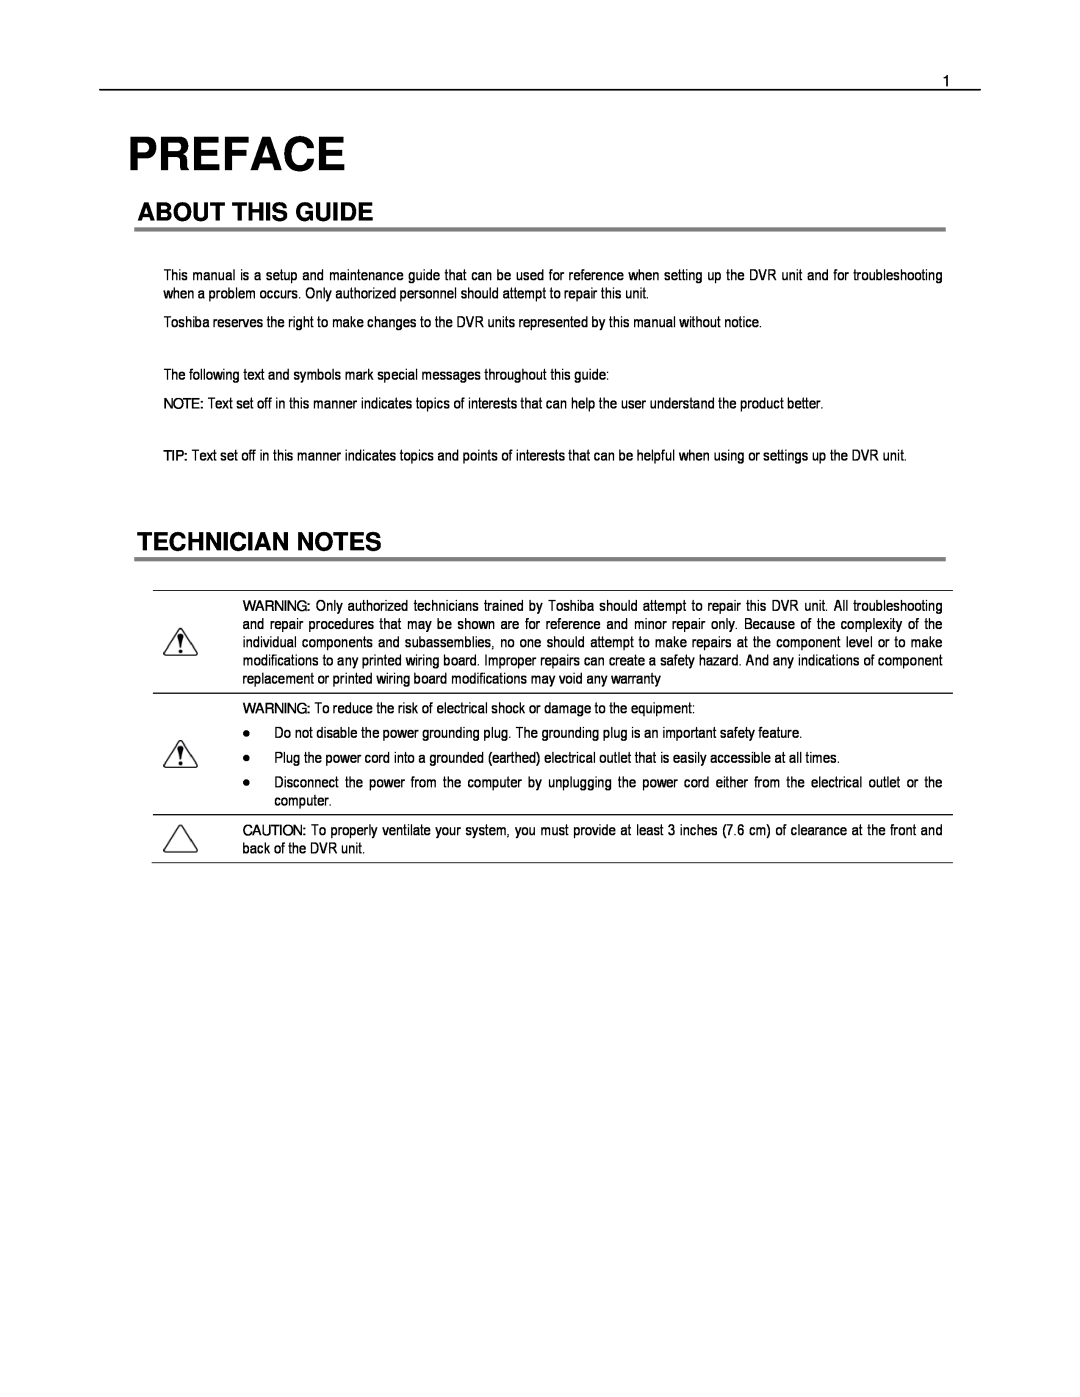 Toshiba EVR32-X, EVR8-X, HVR32-X, HVR8-X, HVR16-X, EVR16-X user manual Preface, About This Guide, Technician Notes 